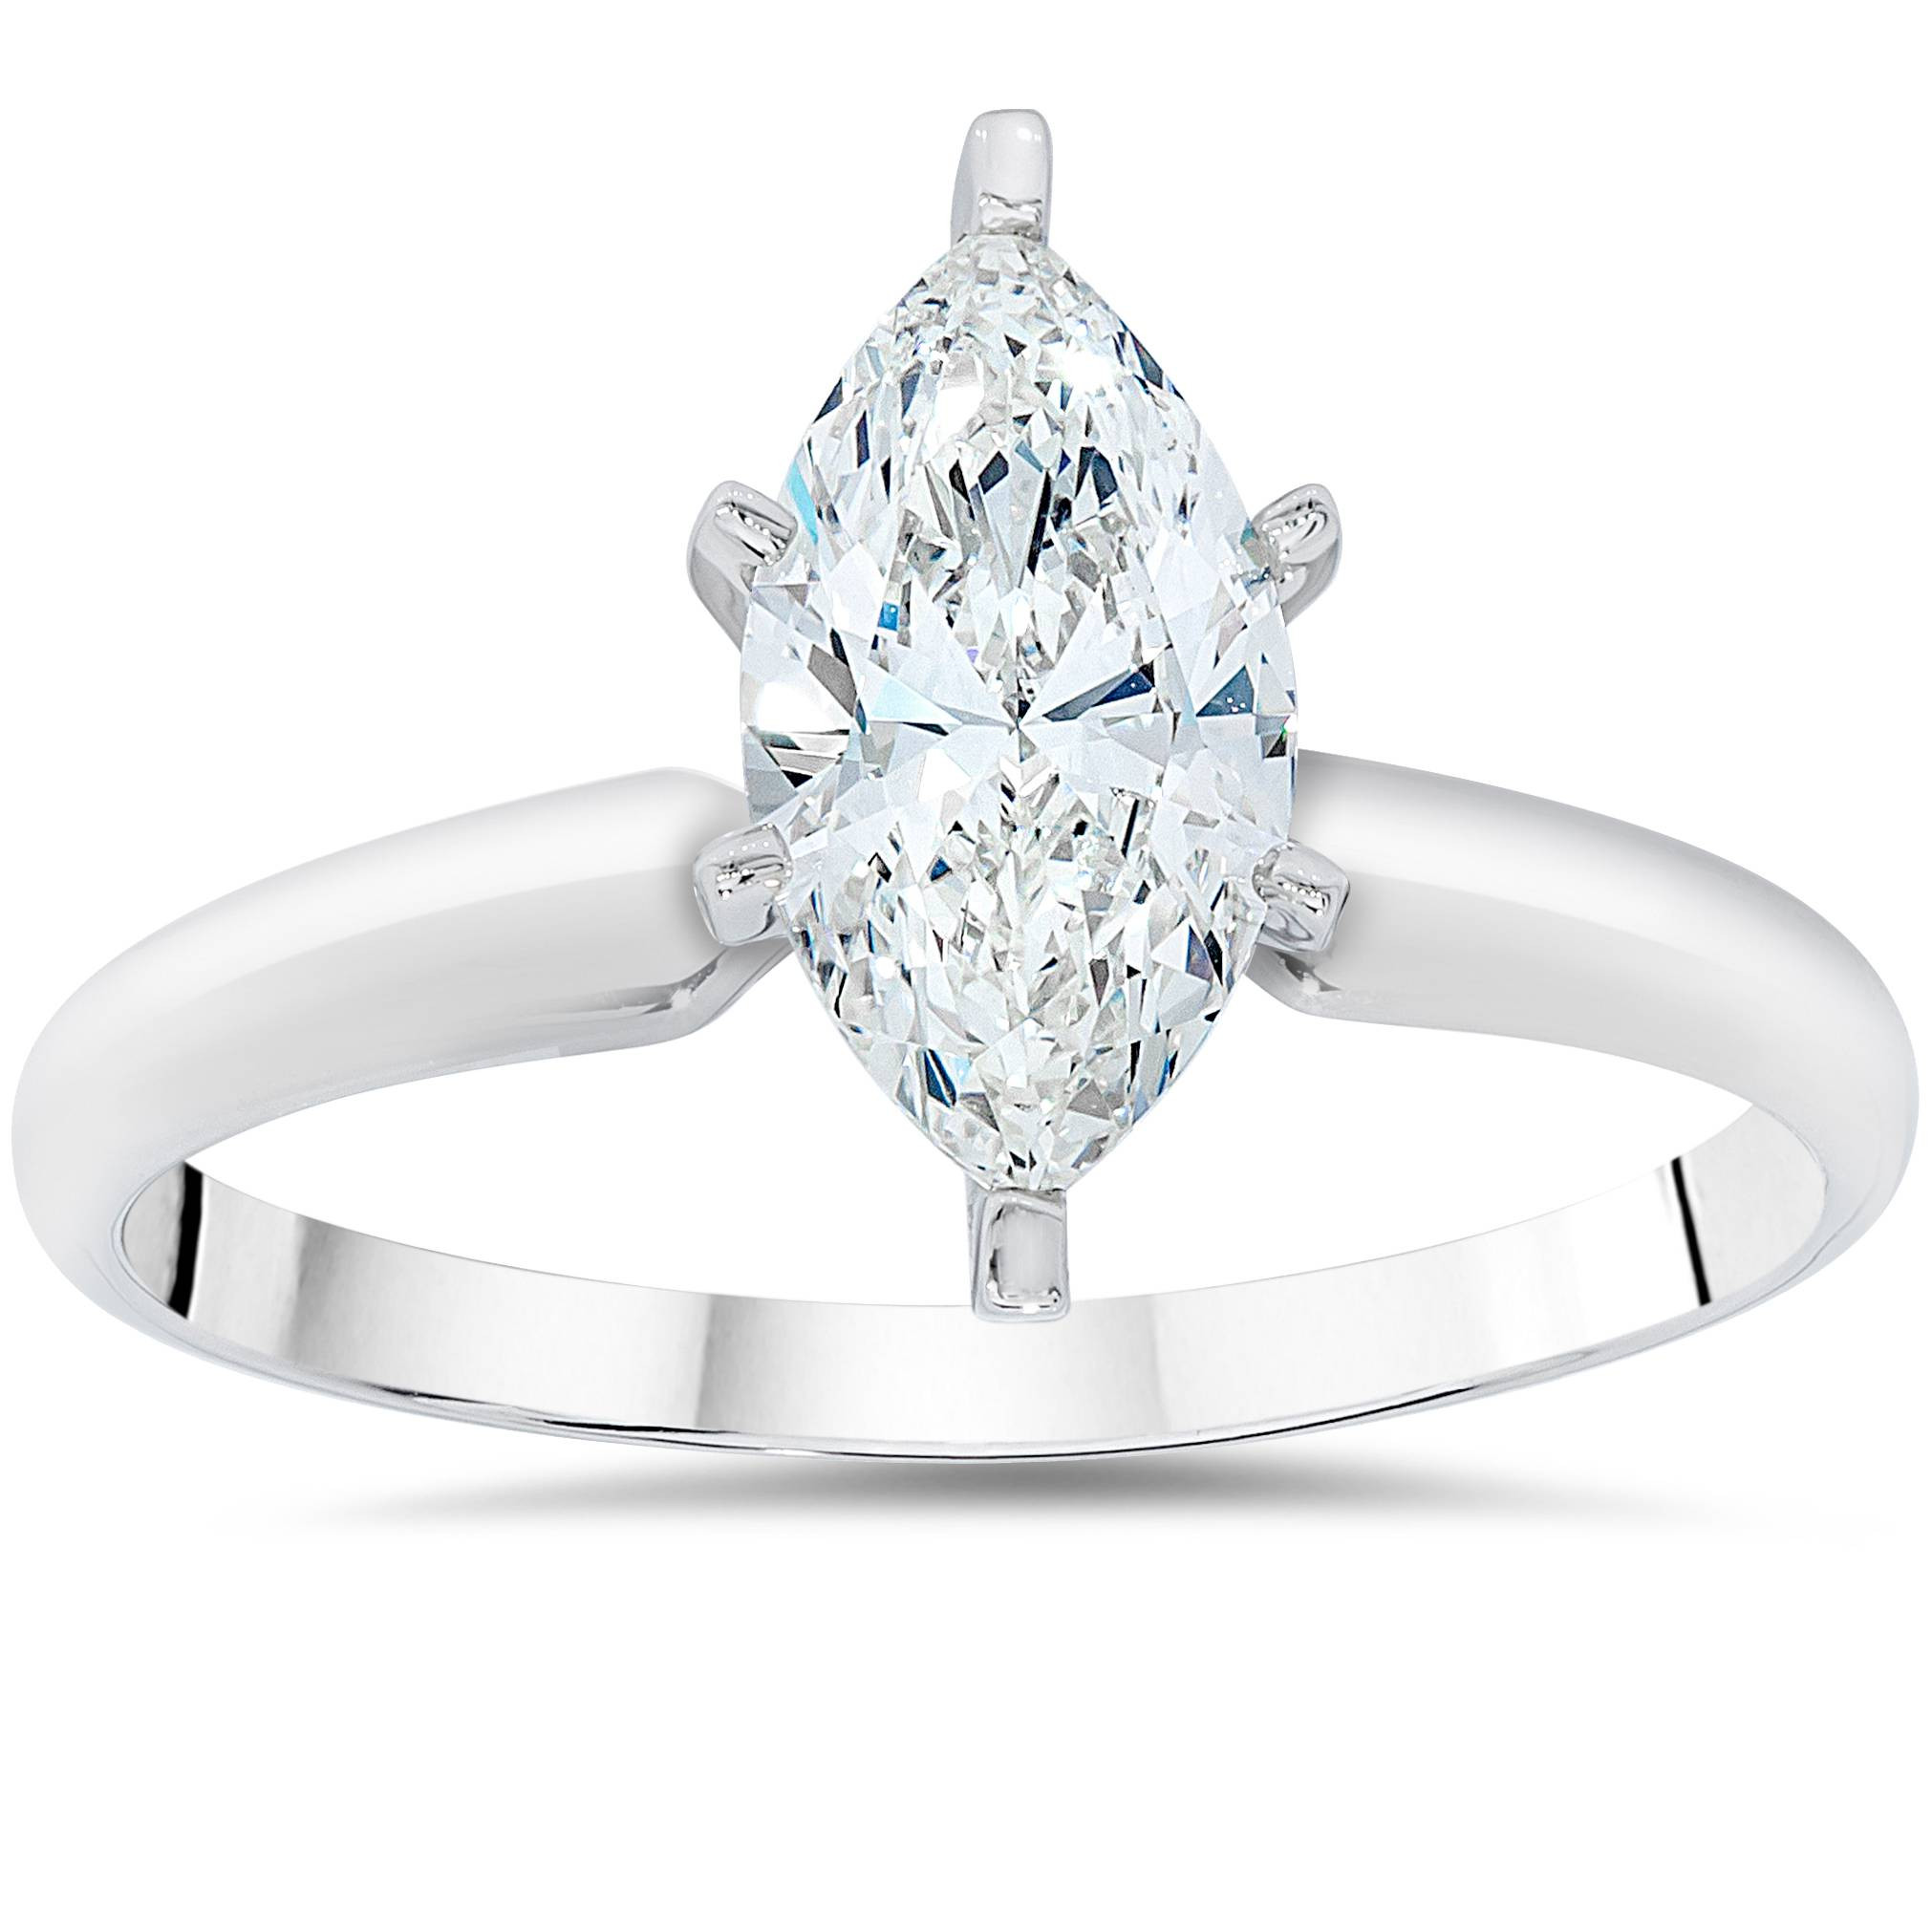 Marquise Diamond Engagement Rings
 1ct Solitaire Marquise Enhanced Diamond Engagement Ring